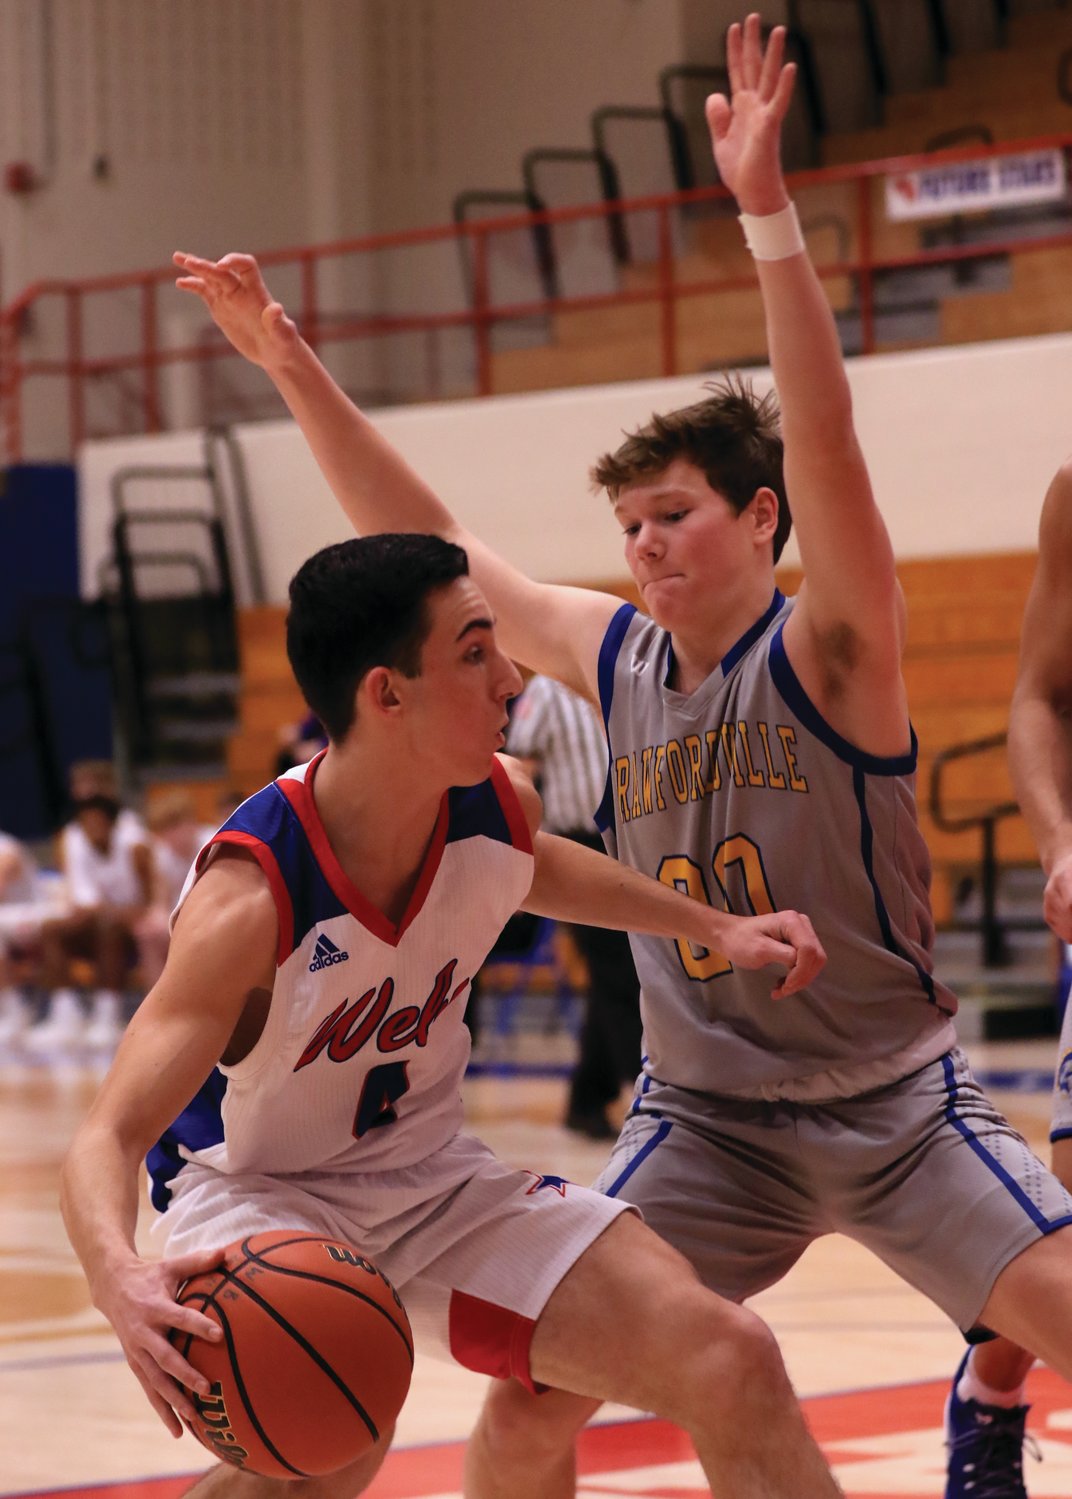 Western Boone's Jonathan McAtee is guarded by Crawfordsville's Cale Coursey.